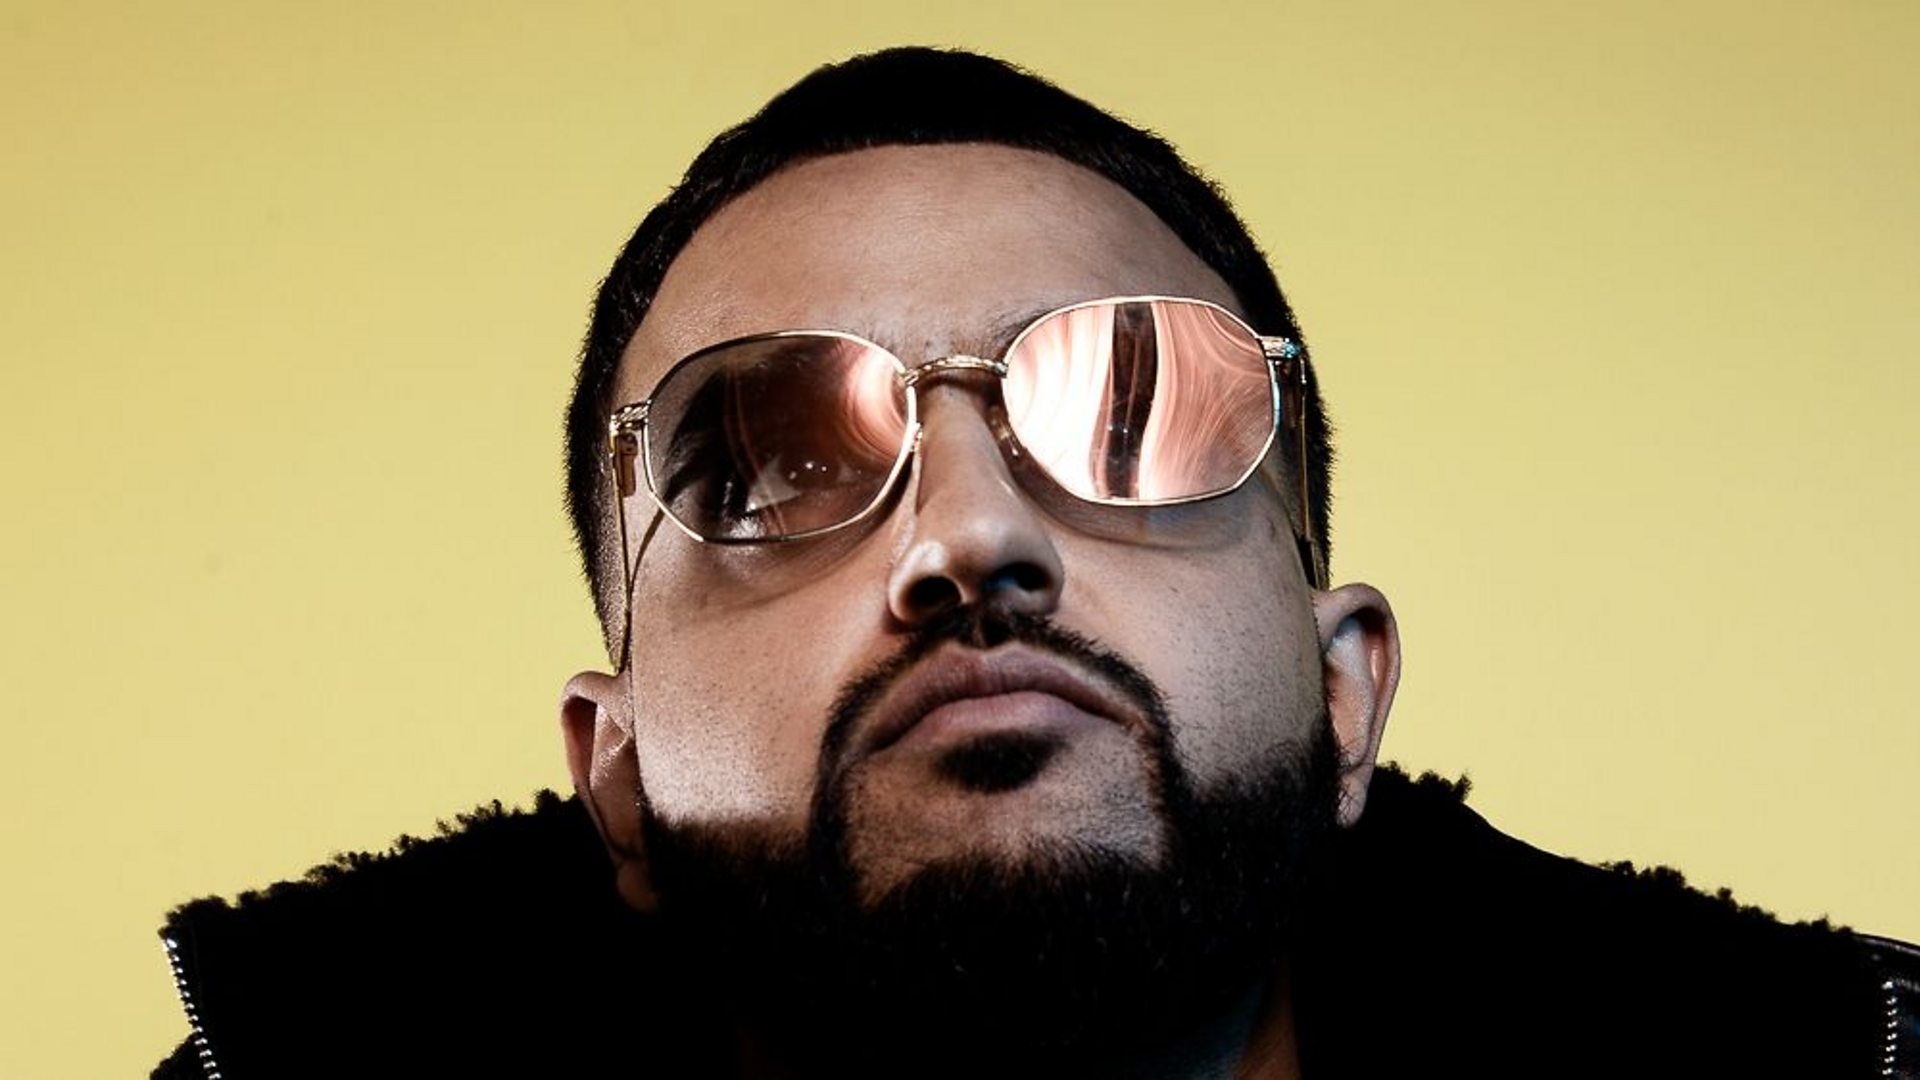 HD wallpaper, United States, Nav, Canadian Indian Rapper, Desktop Full Hd Nav Wallpaper, 1920X1080 Full Hd Desktop, Topped Charts